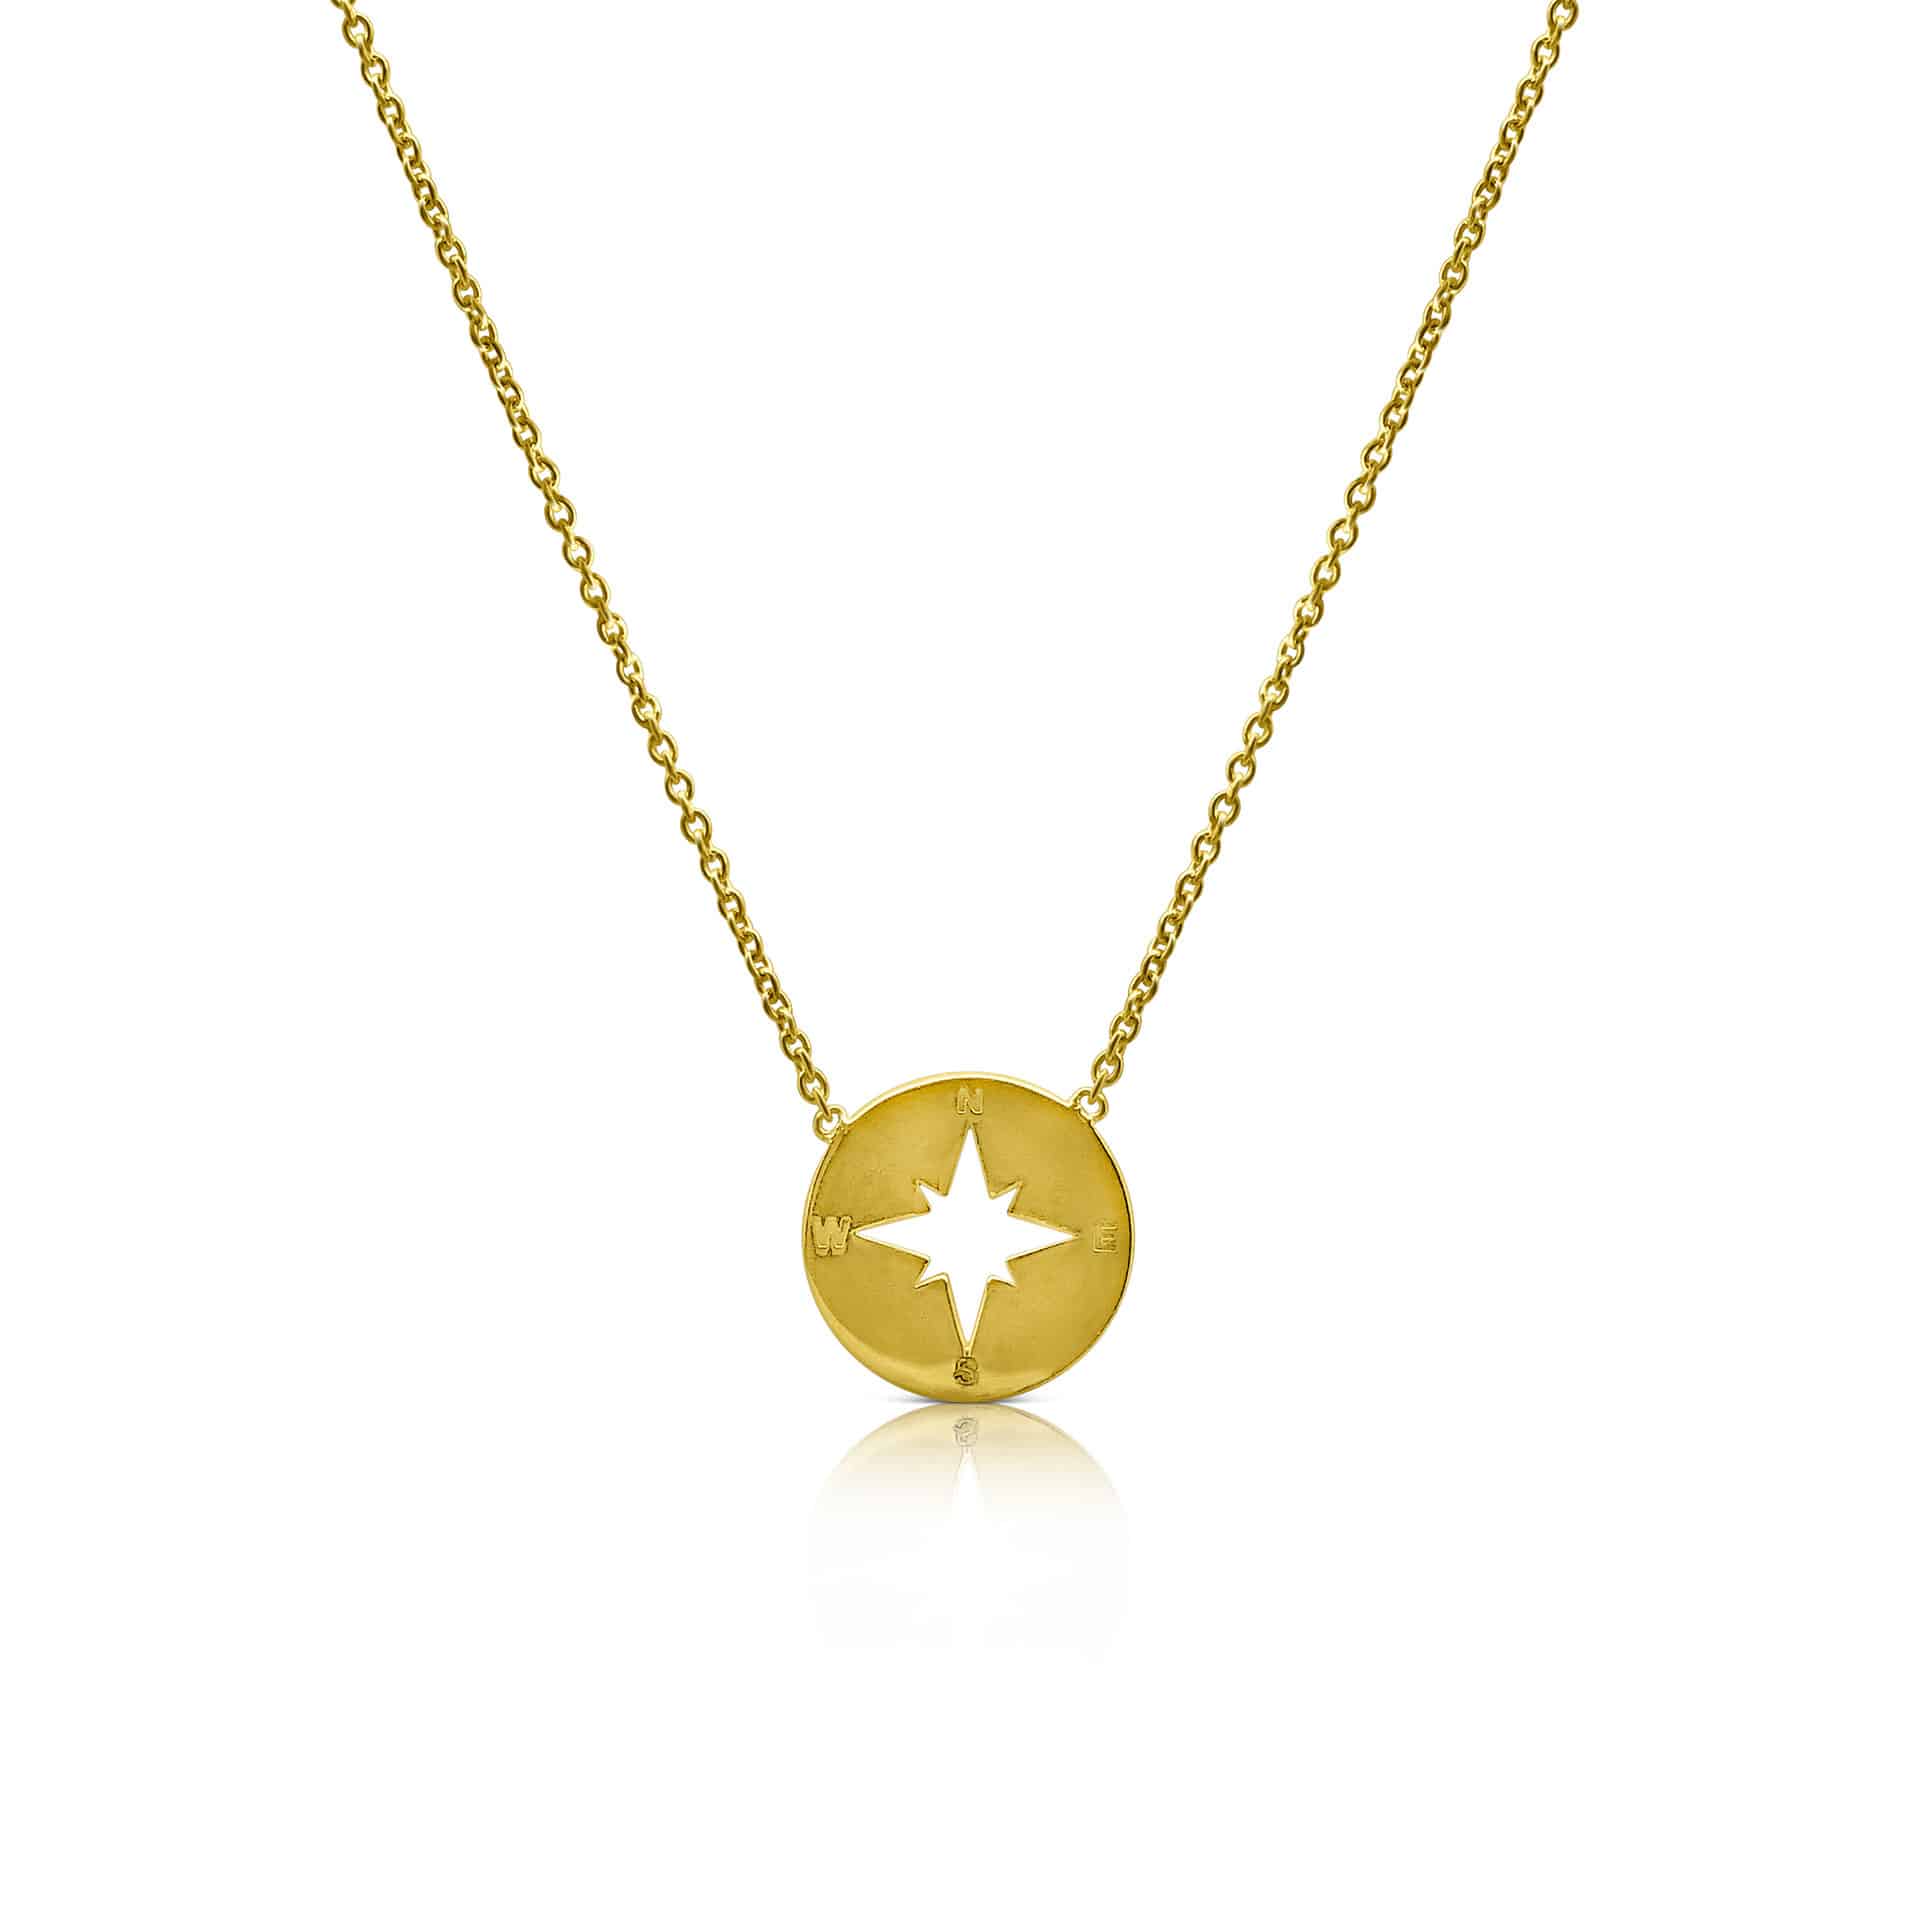 Ór Collection 9ct Yellow Gold Compass Necklace